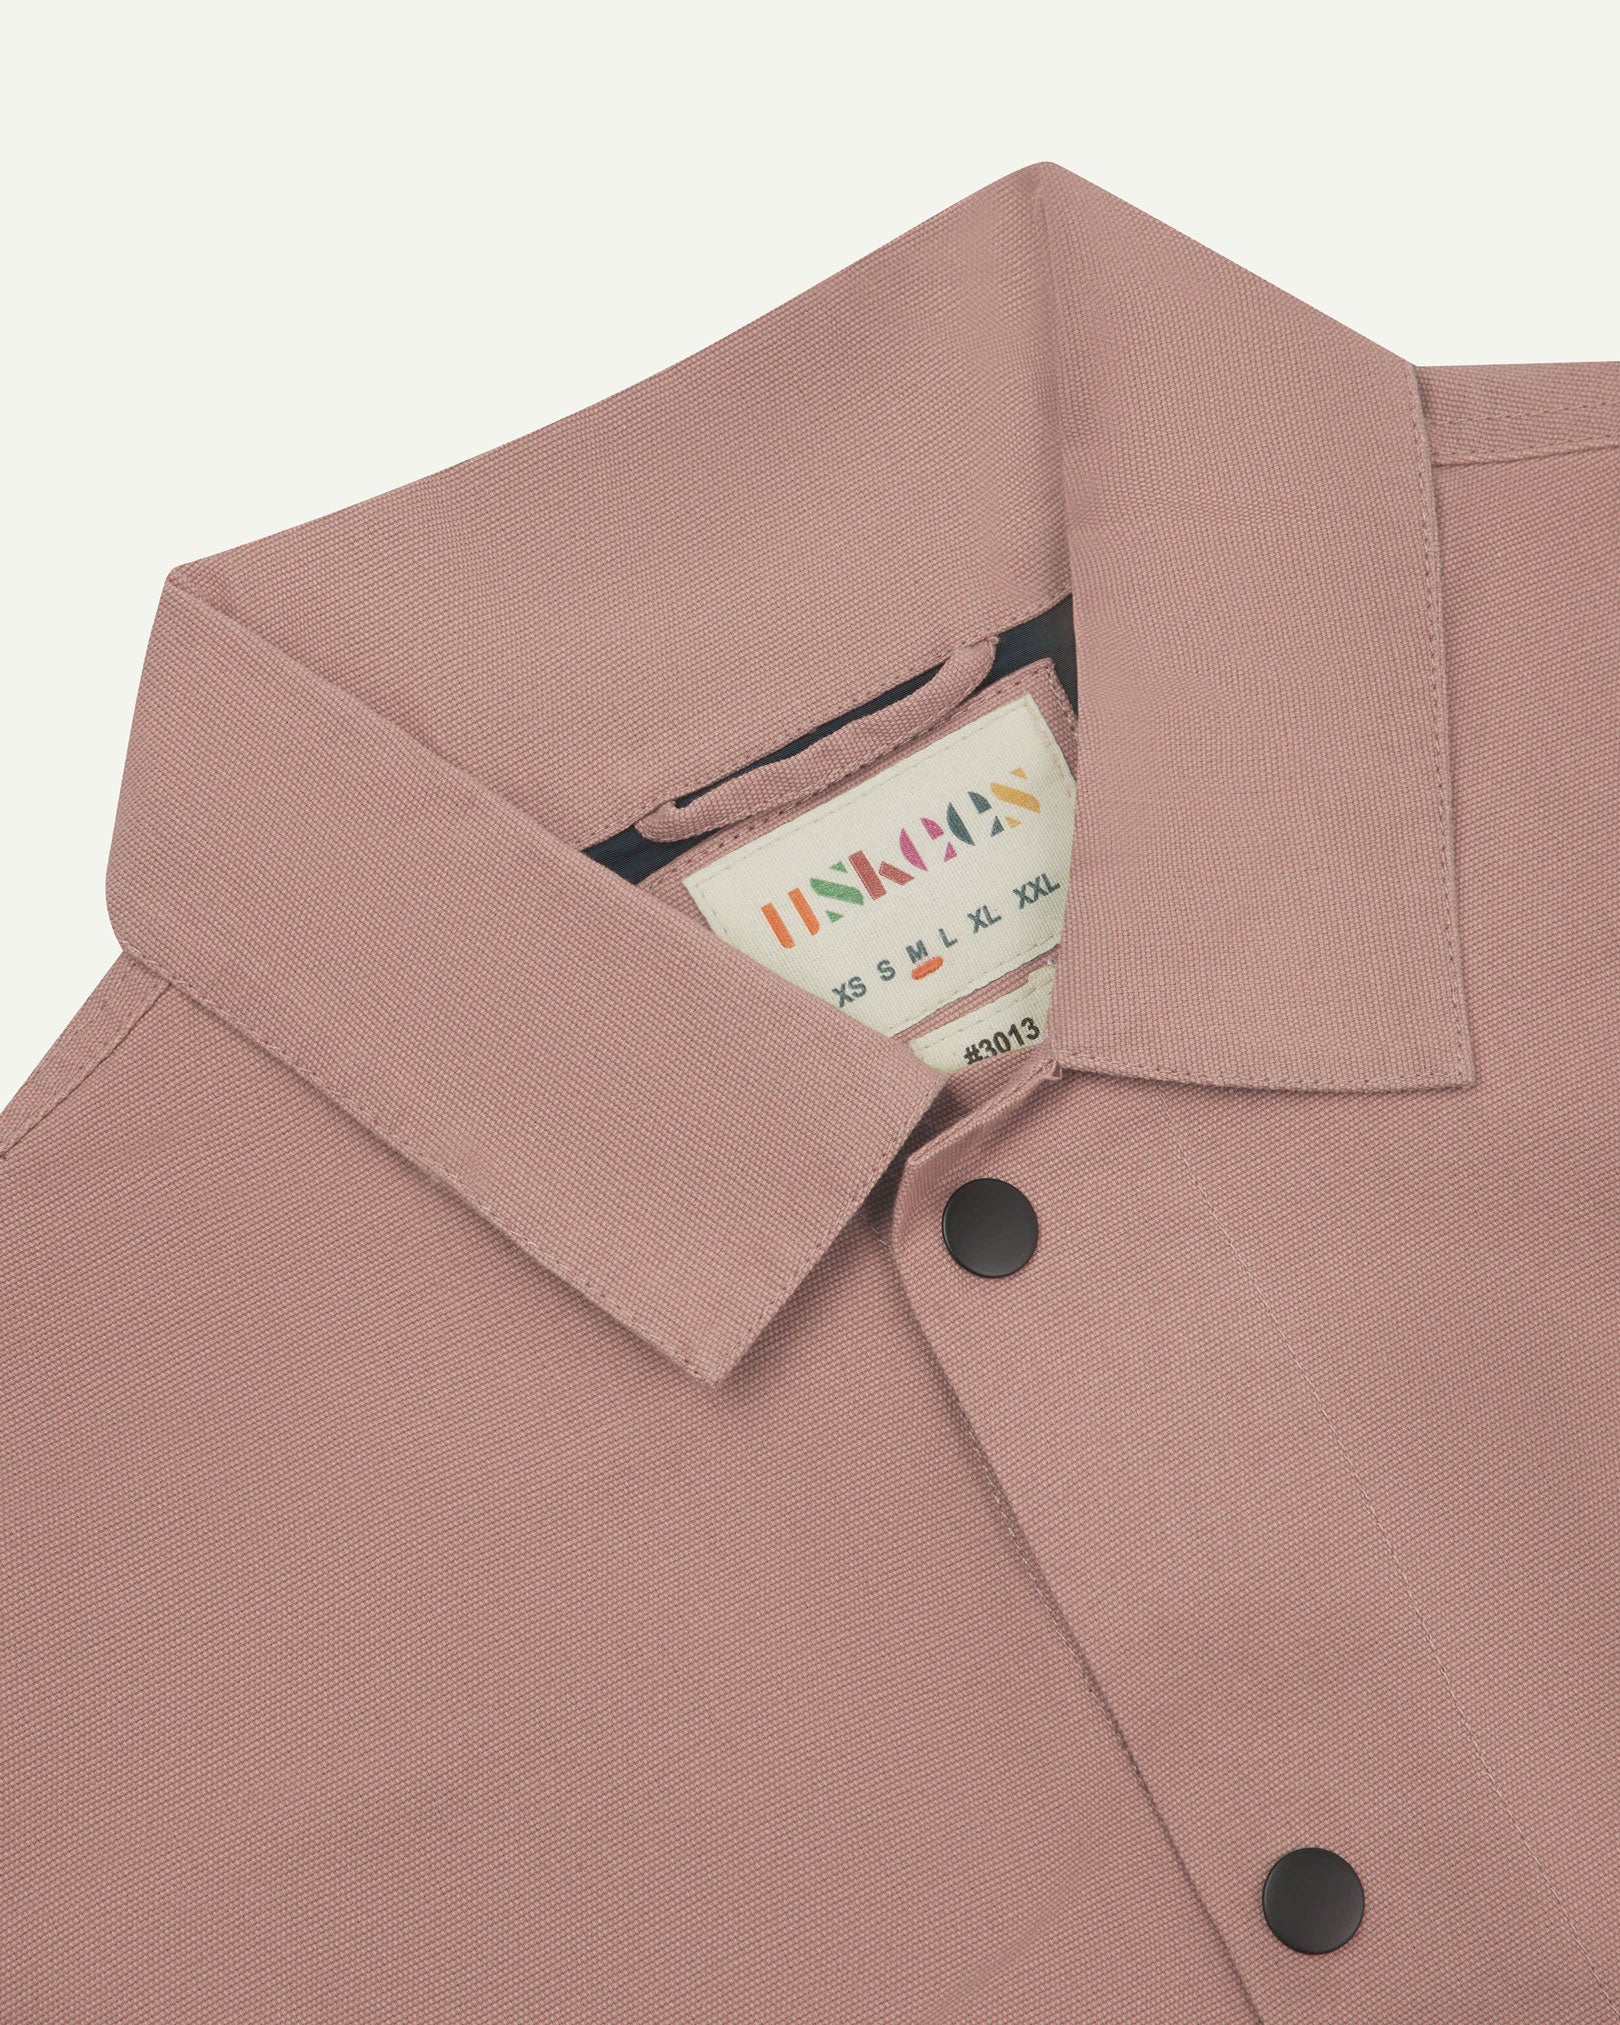 Neck view of Uskees 3013 dusty pink organic cotton coach jacket with focus on collar, contrast inner yoke, Uskees brand label and popper buttons.